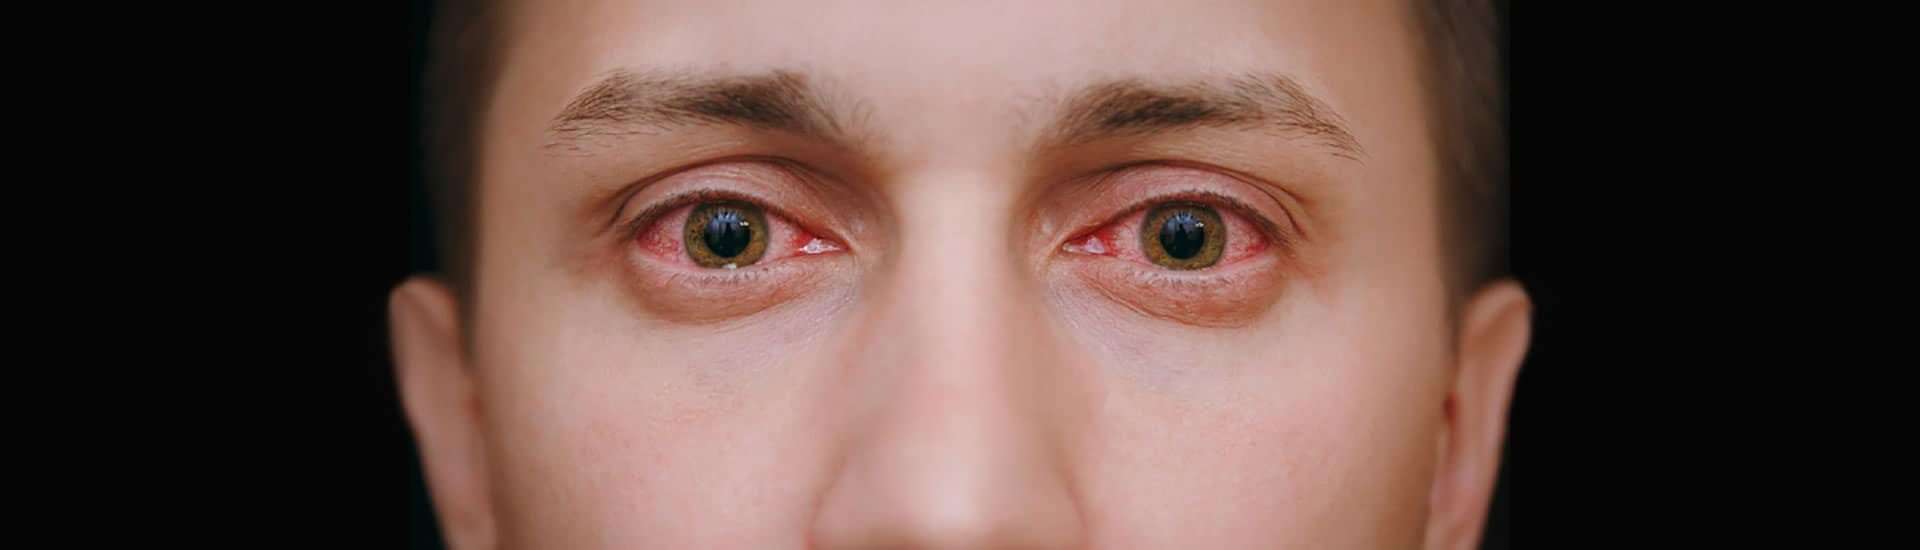 Why Allergies Make Your Eyes Red and Itchy